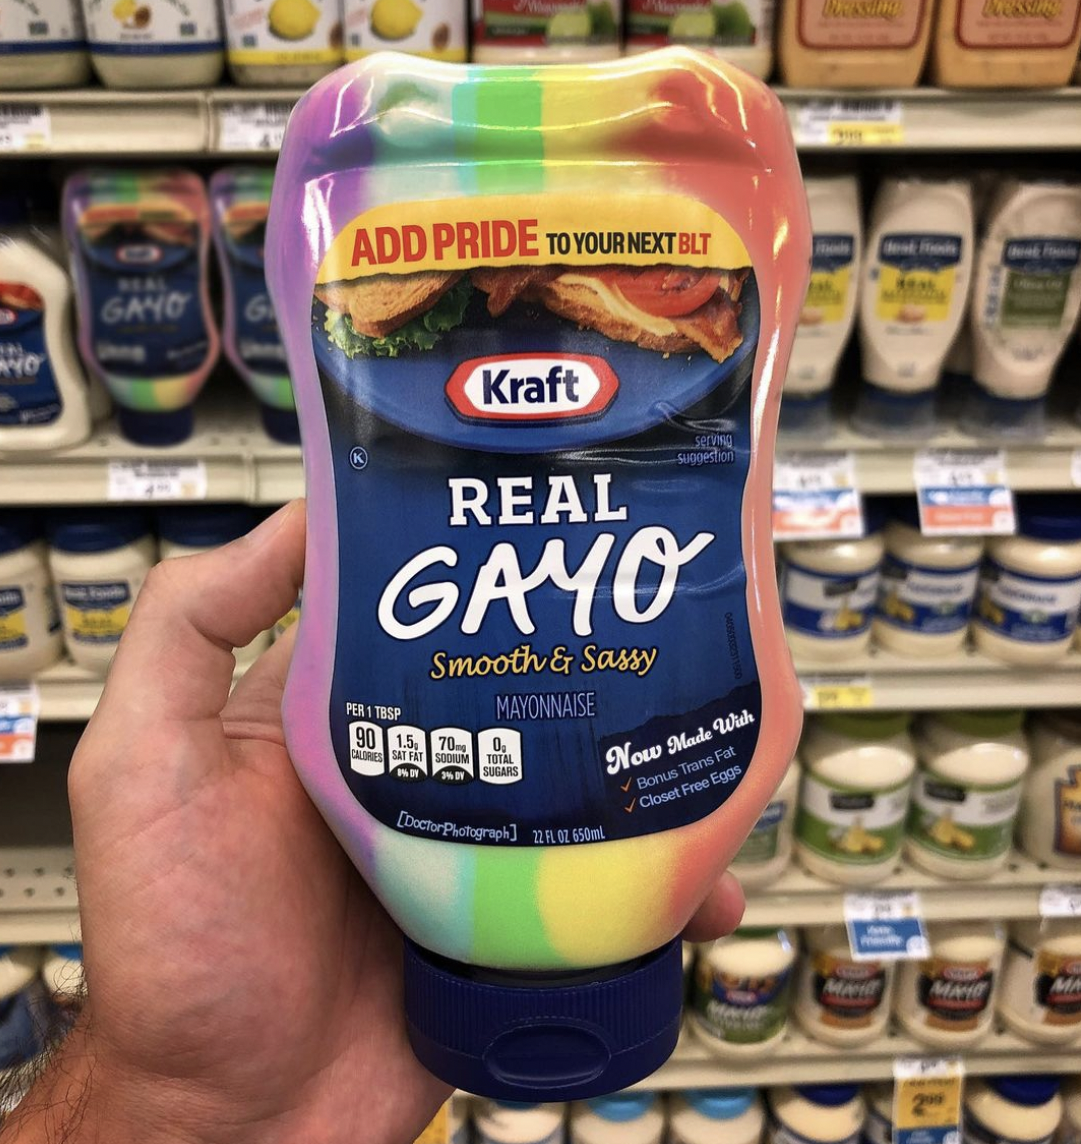 doctor photograph memes - real gayo - Gayo Add Pride To Your Next Blt Kraft Real Gayo Smooth & Sassy Mayonnaise Per Trop Adre Now Made With Bon Tf Closet Free Eg Nossinn Maid D